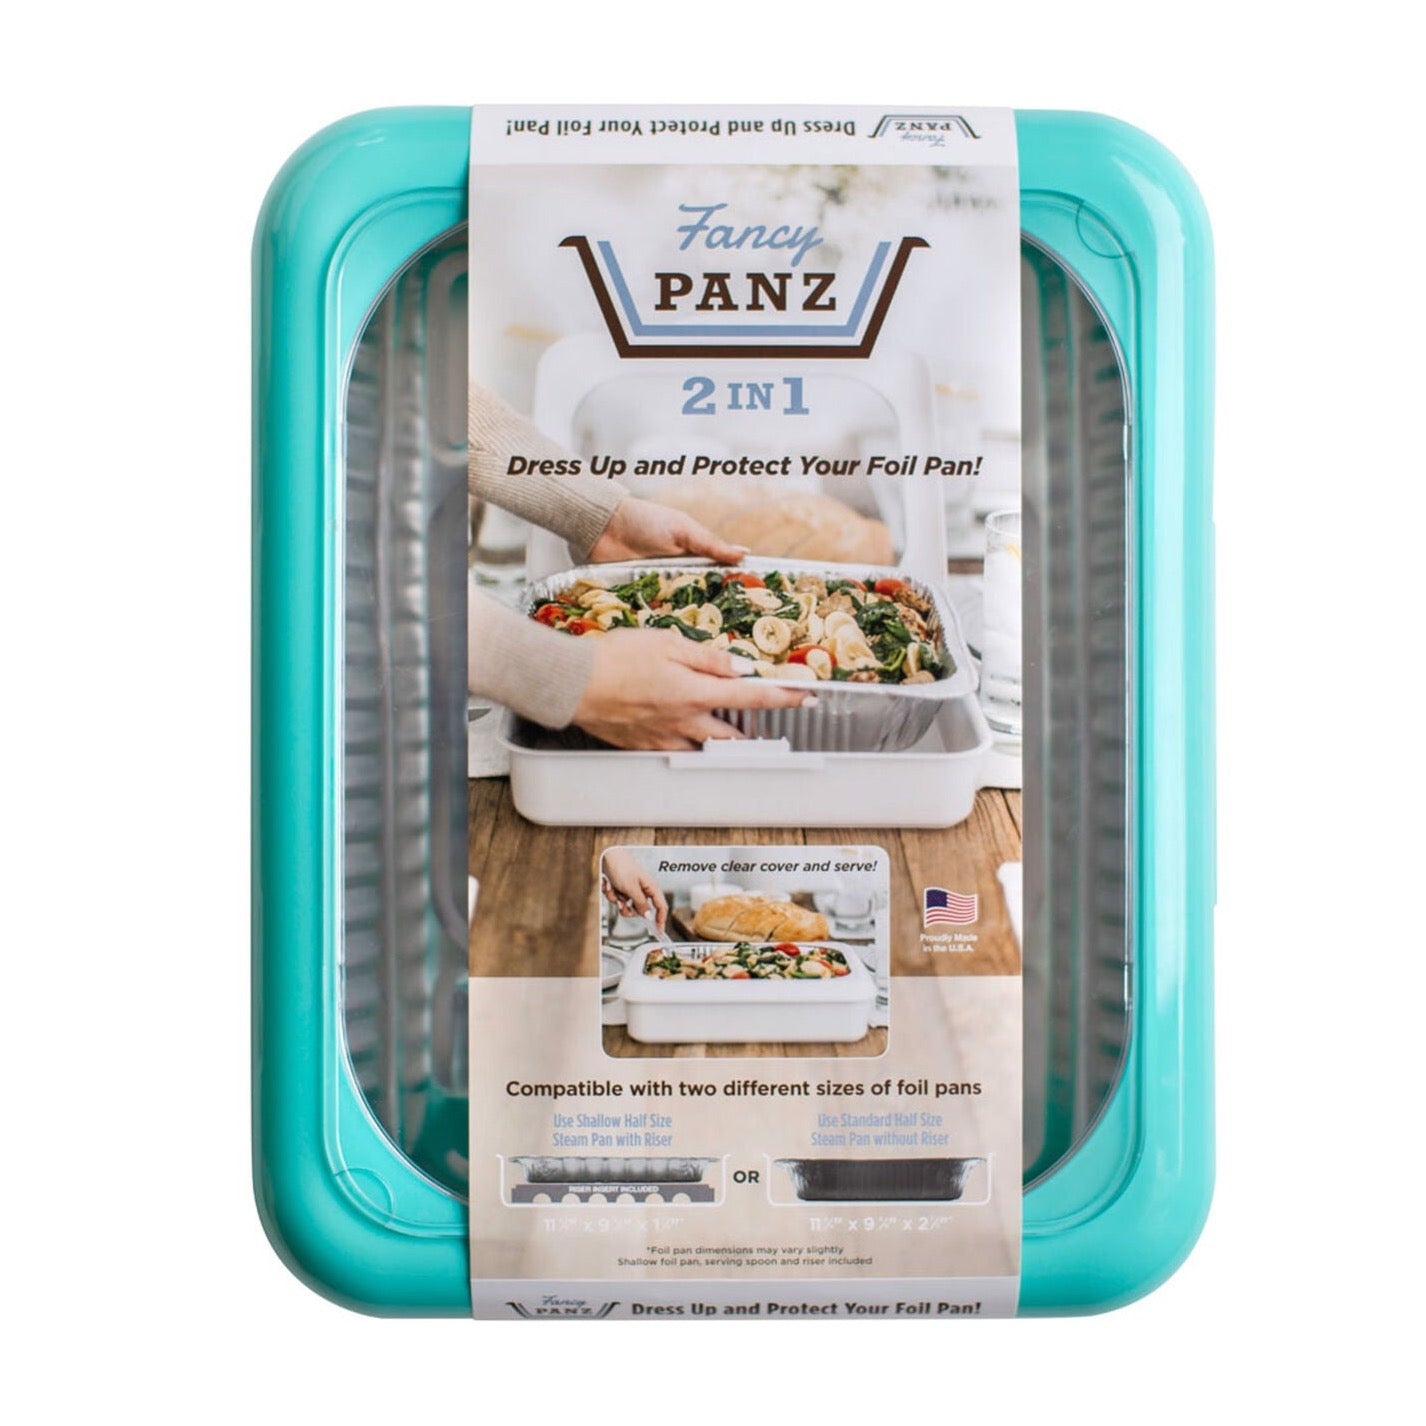 Fancy Panz 2 in 1 Aqua – The Perch on Marble